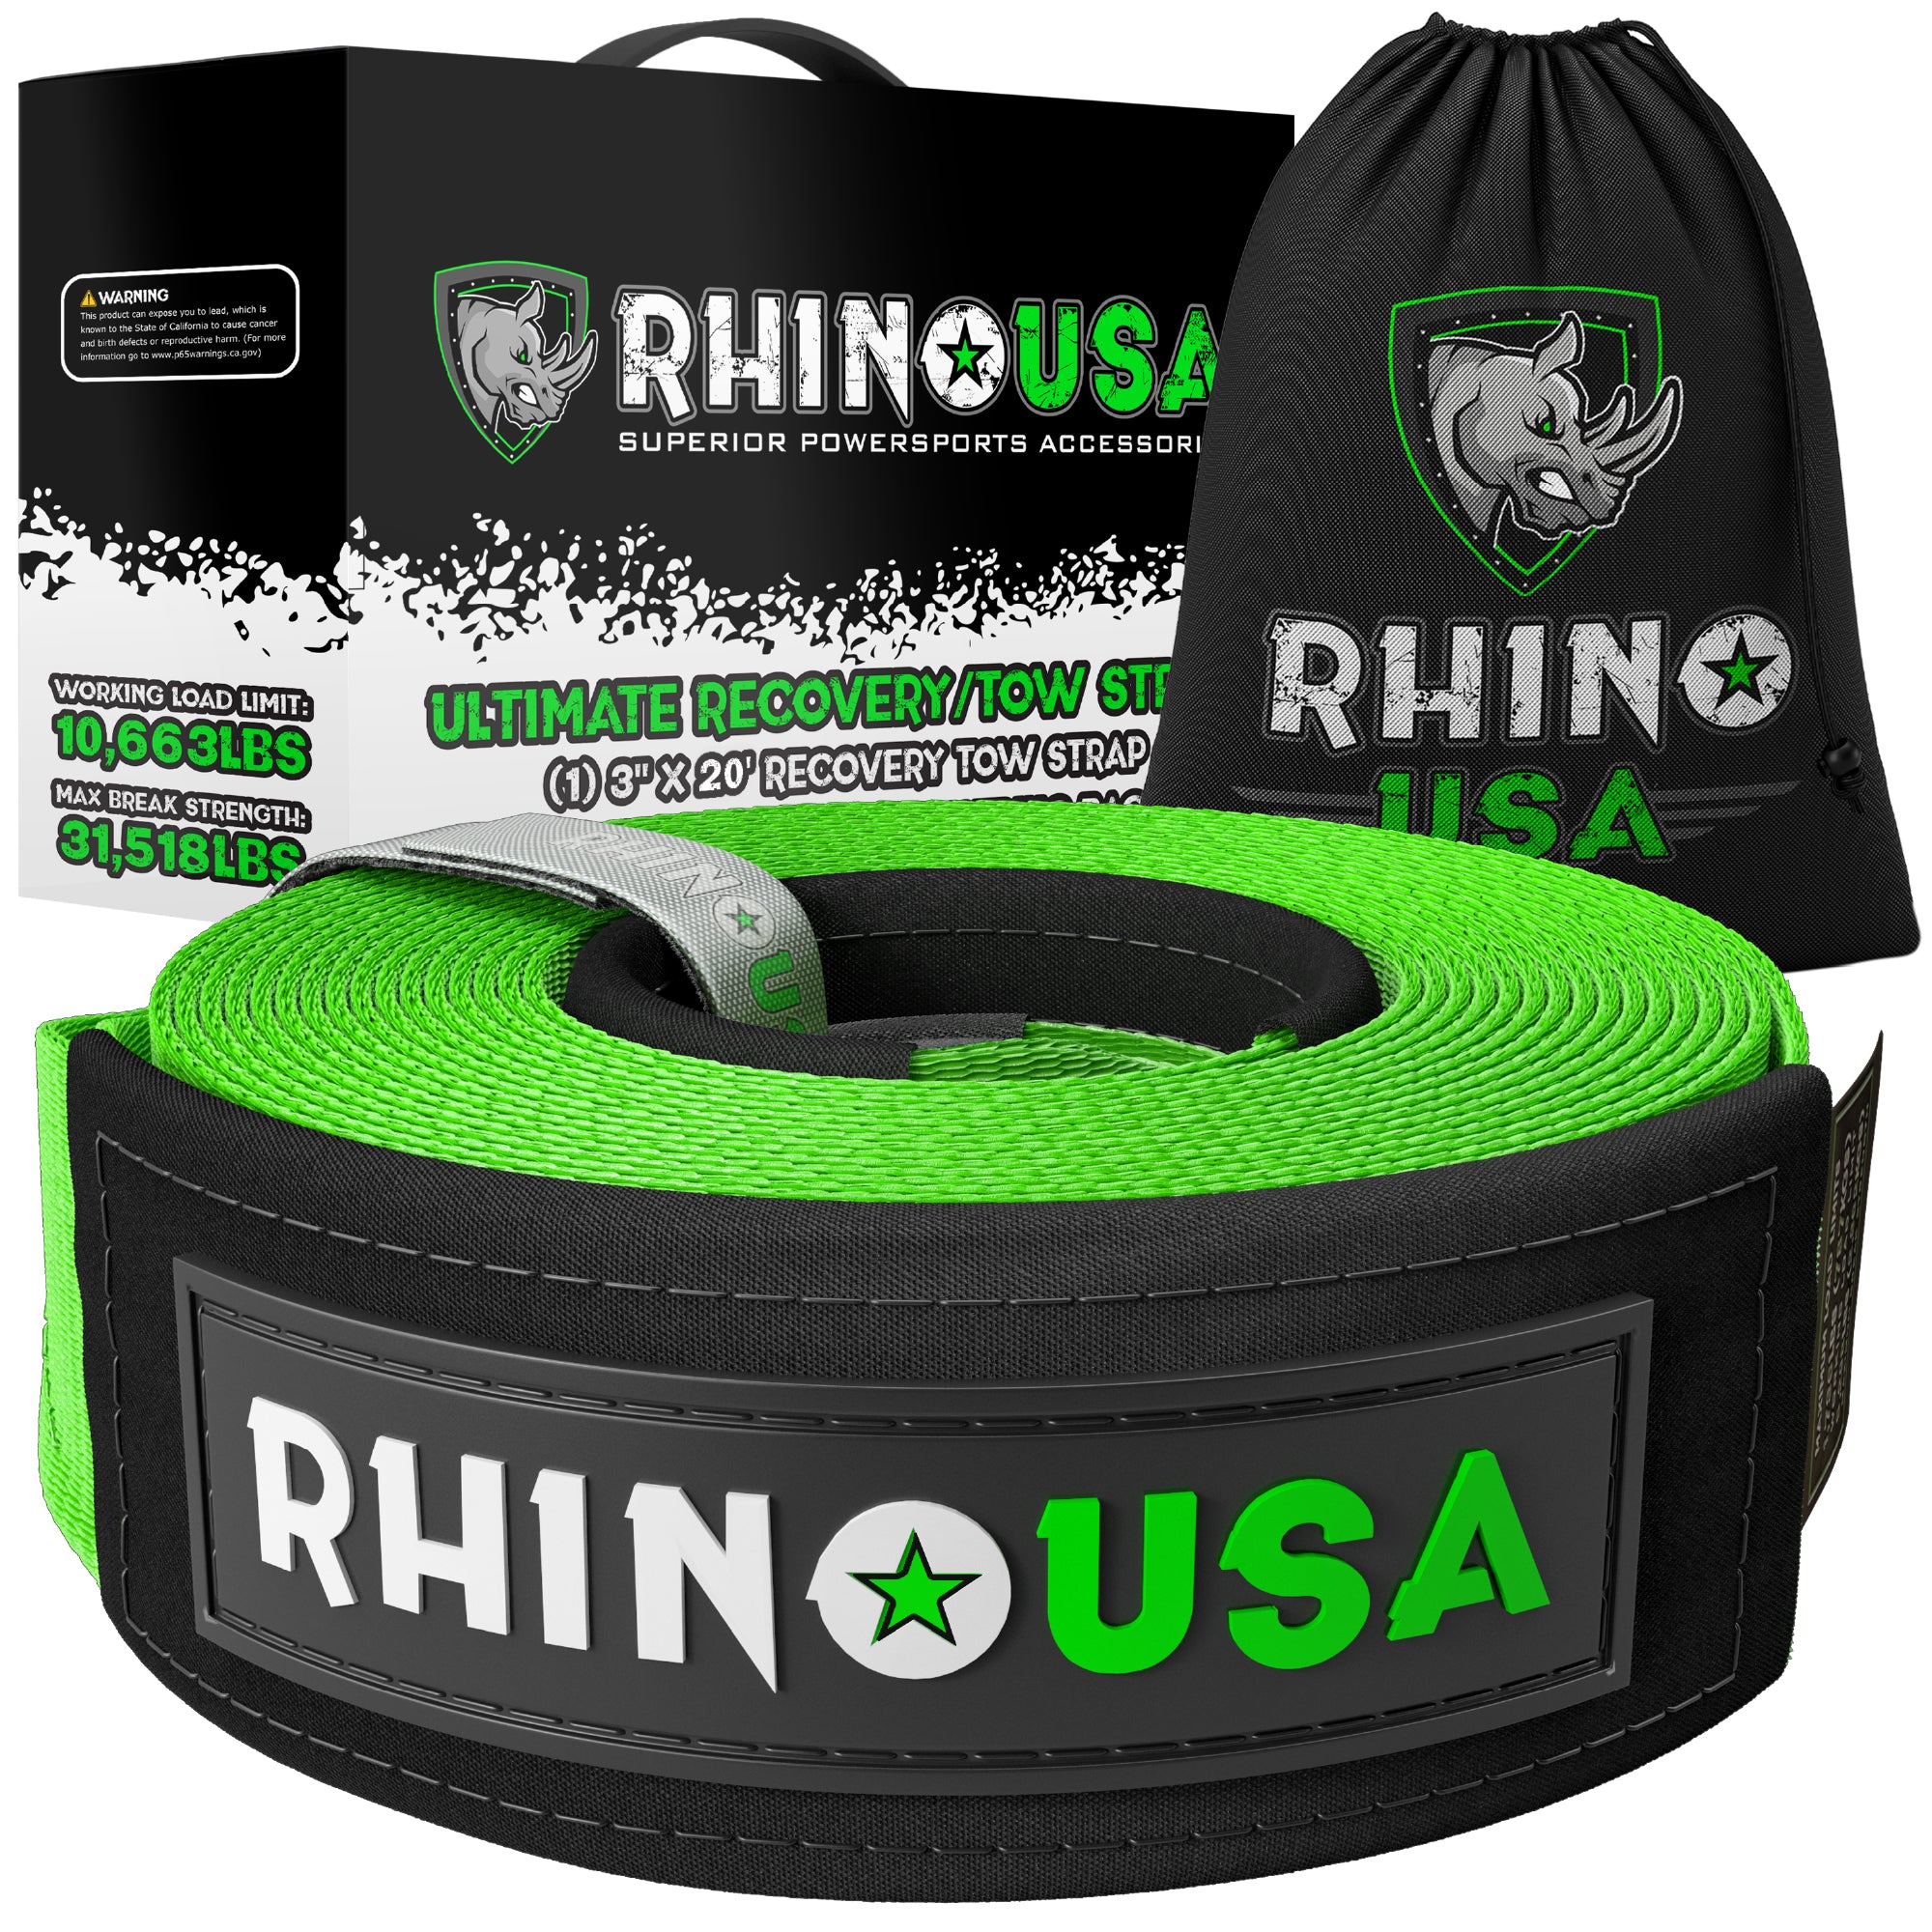 Rhino USA Recovery Tow Strap 3 x 20ft - Lab Tested 31,518lb Break Strength